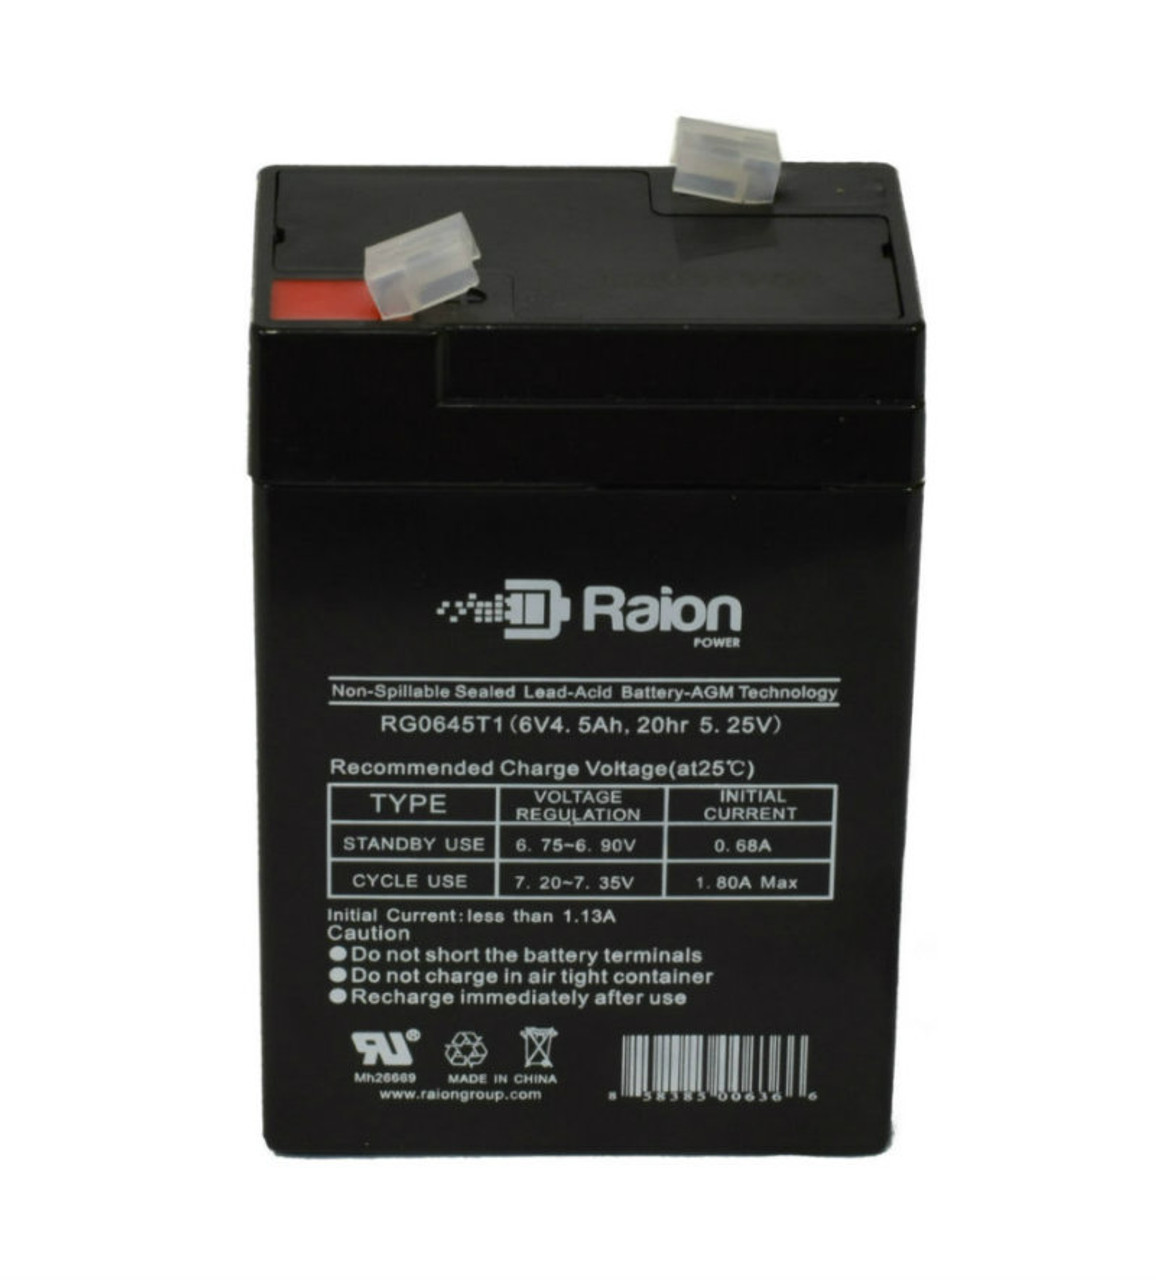 Raion Power RG0645T1 Replacement Battery Cartridge for Starlight 3FM6